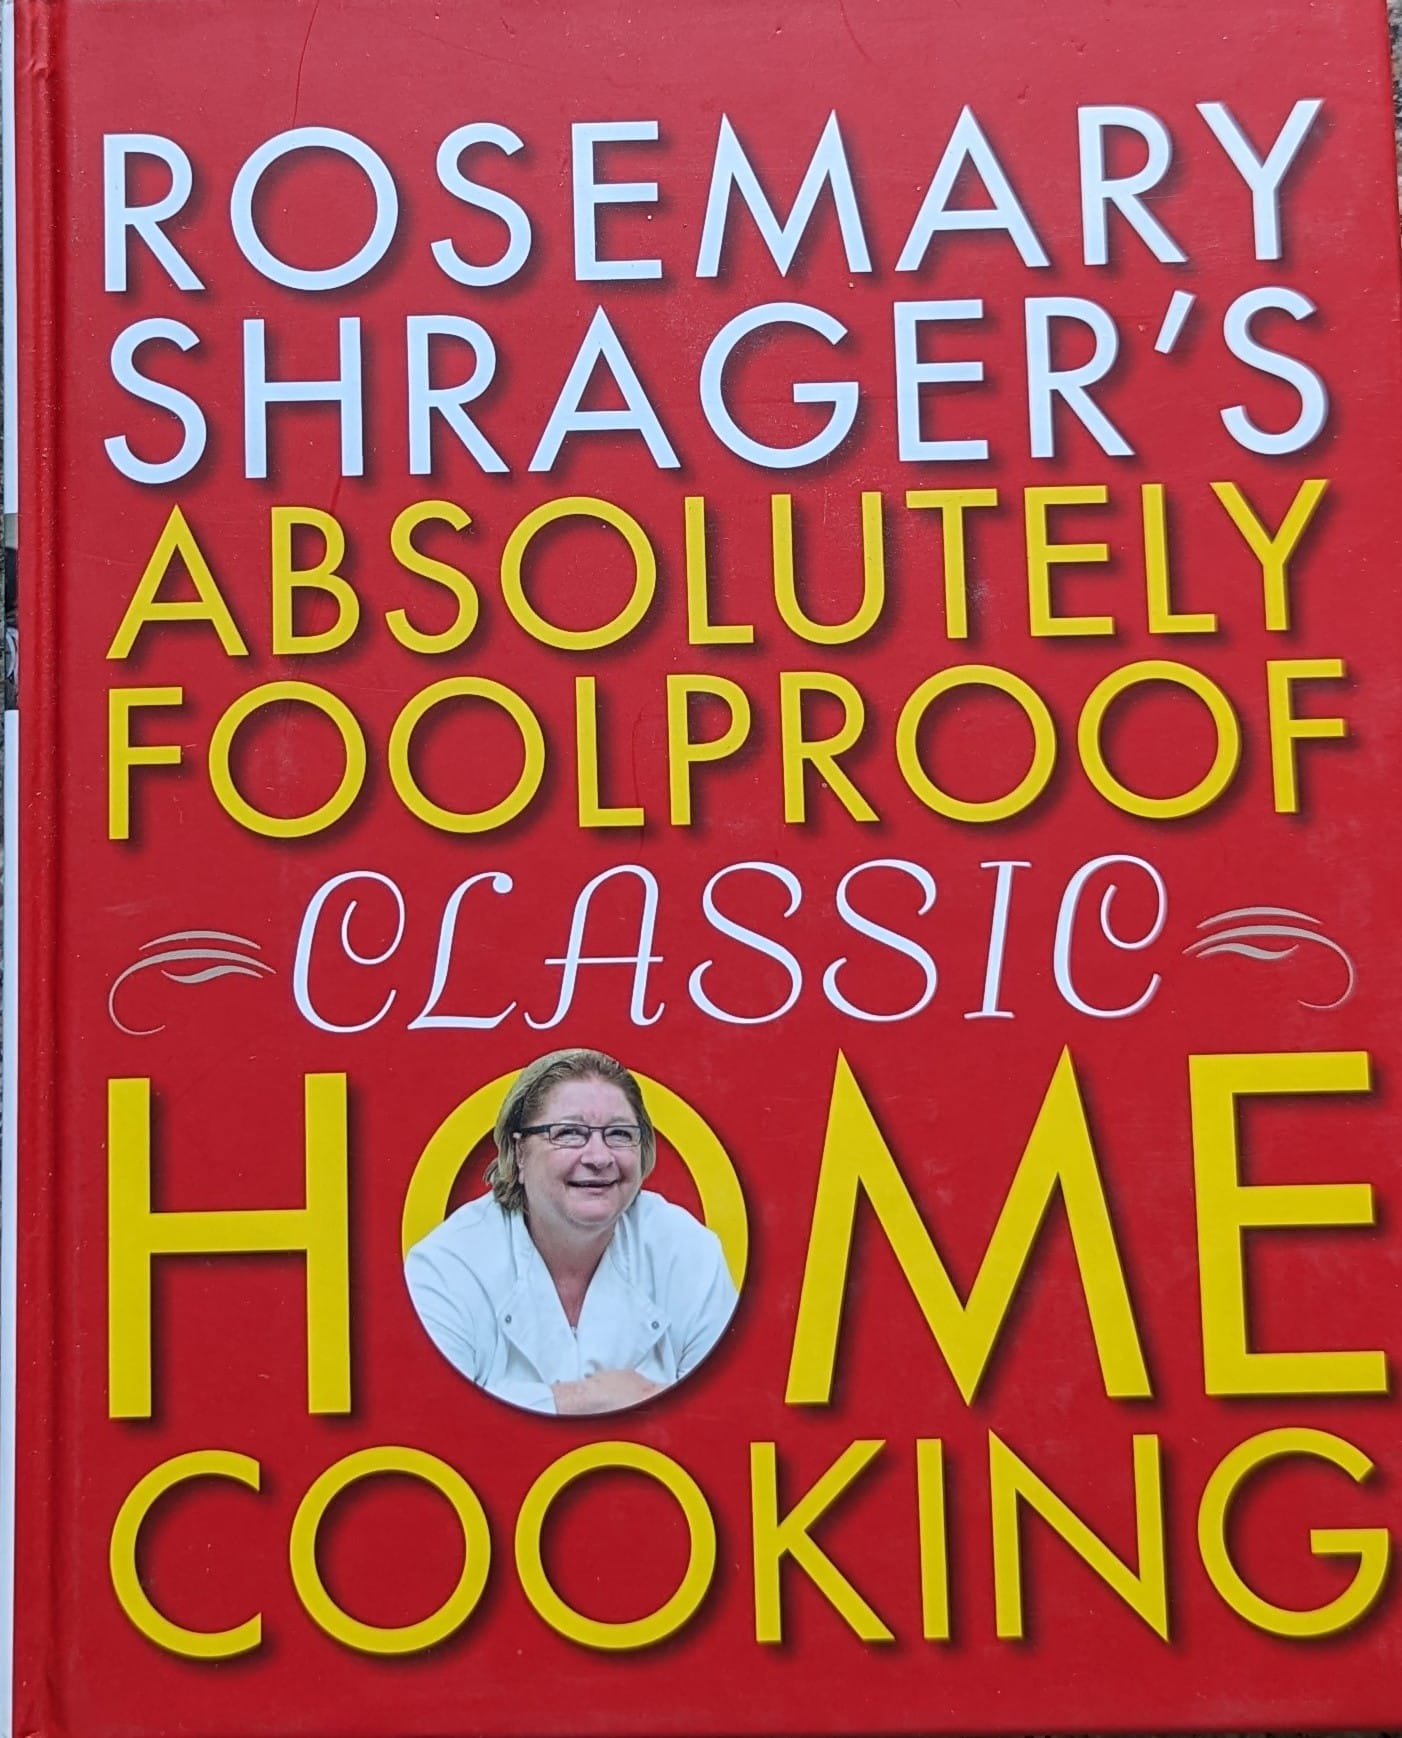 rosemary shrager's absolutely foolproof classic home cooking                                         rosemary shrager                                                                                    